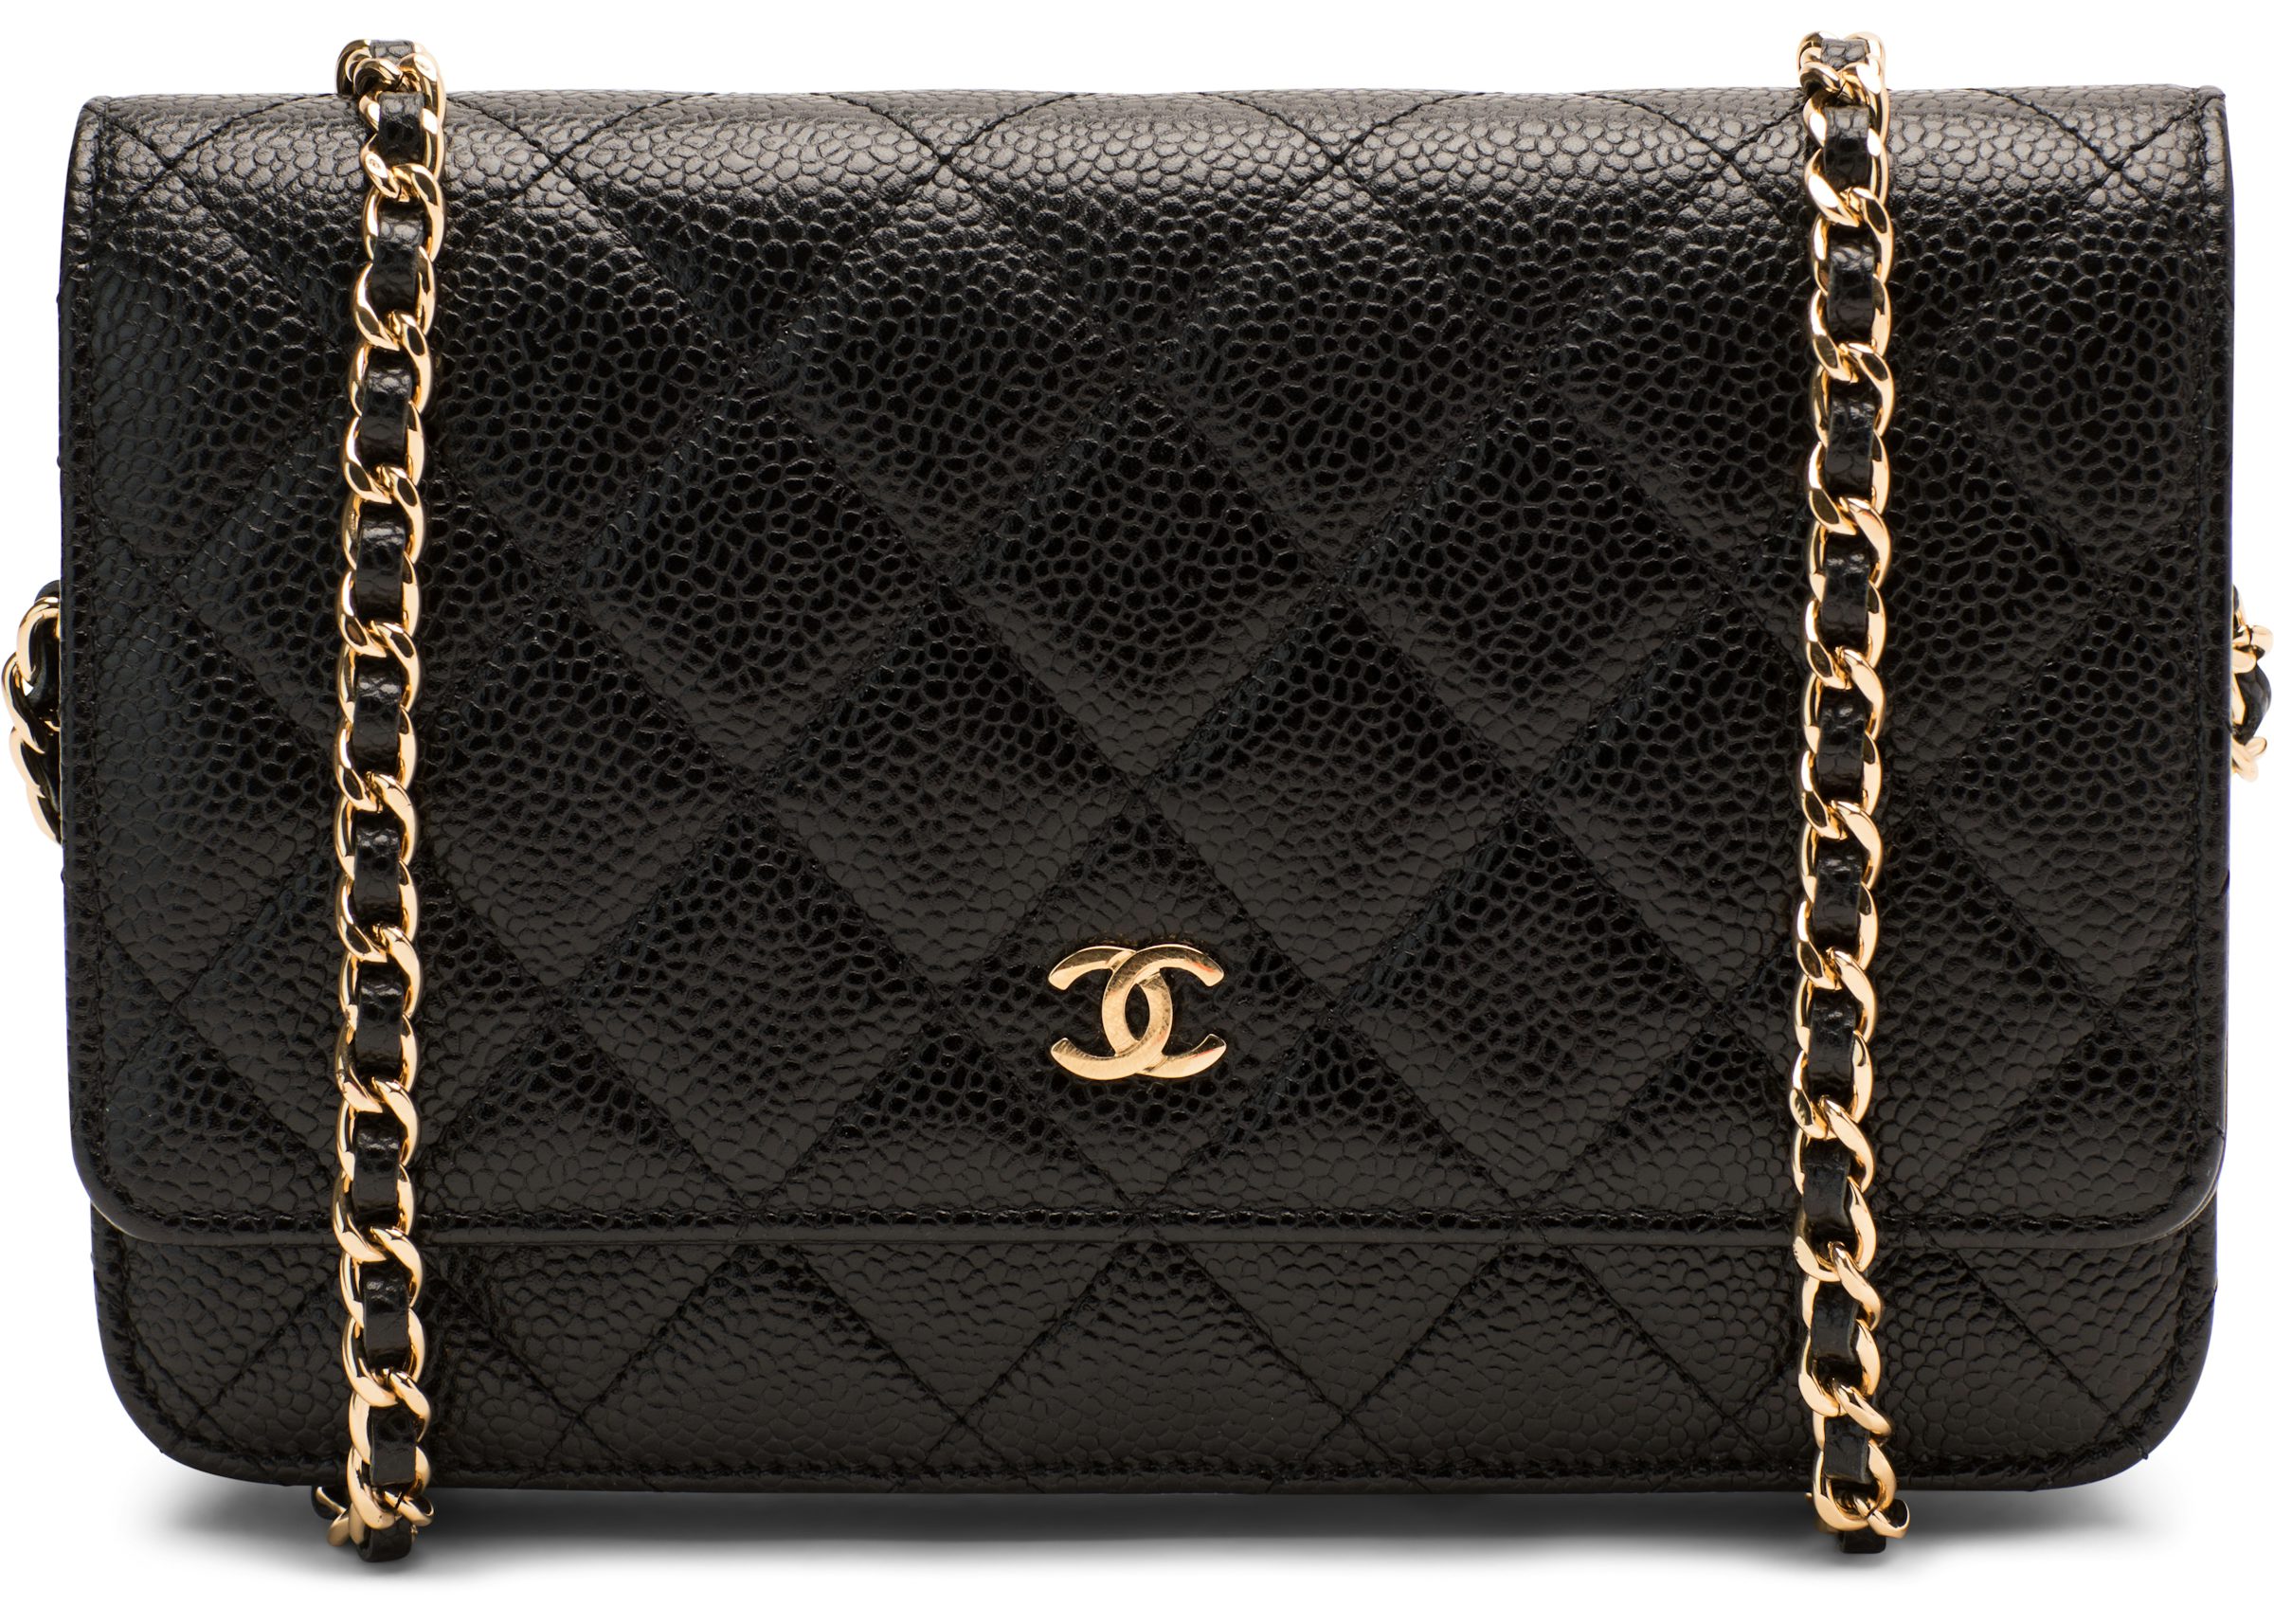 caviar chanel wallet on chain